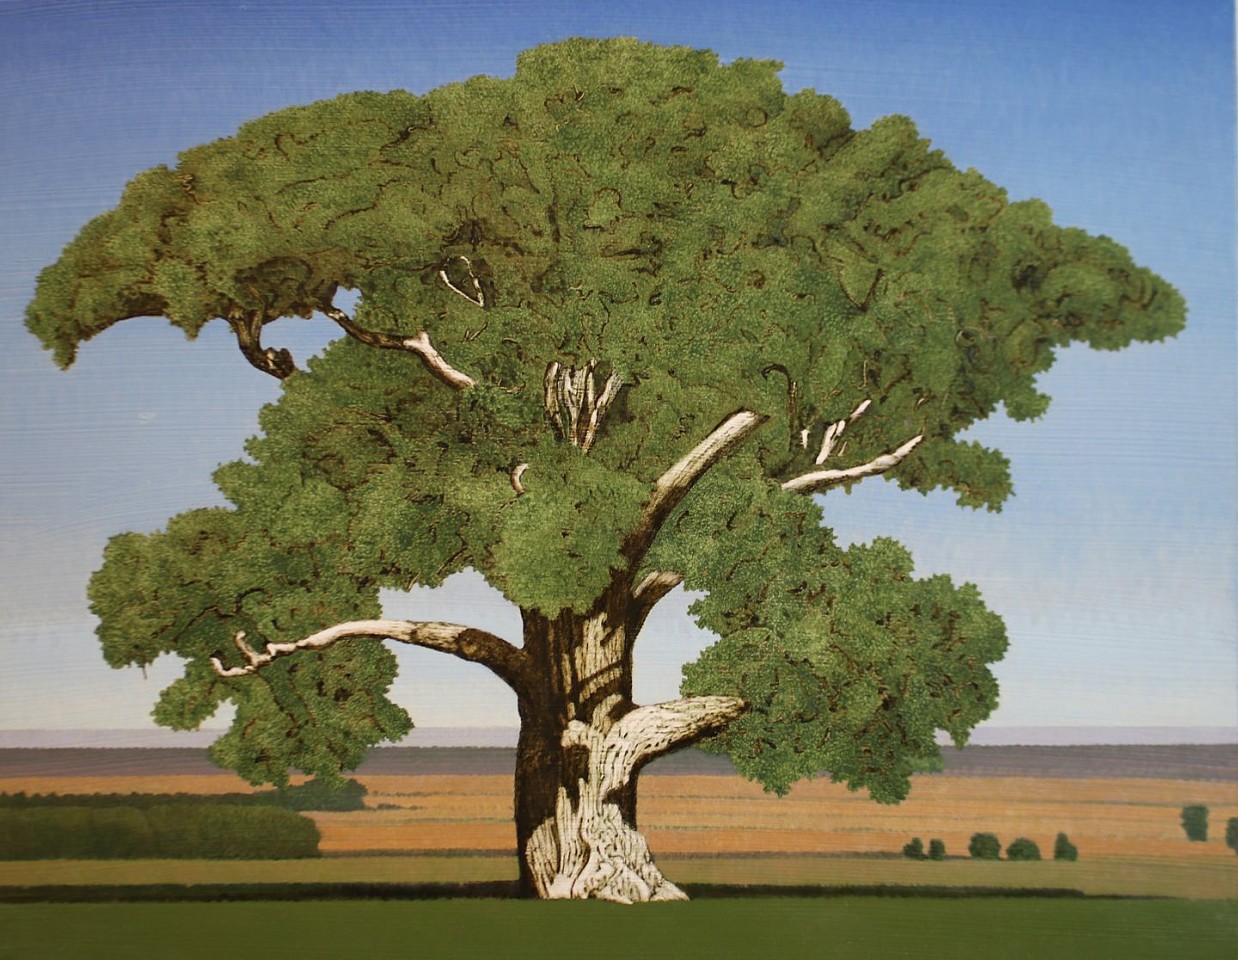 Clay Wagstaff (LA)
Cottonwood no. 15, 2022
WAG386
oil on panel, 18 x 23 inches